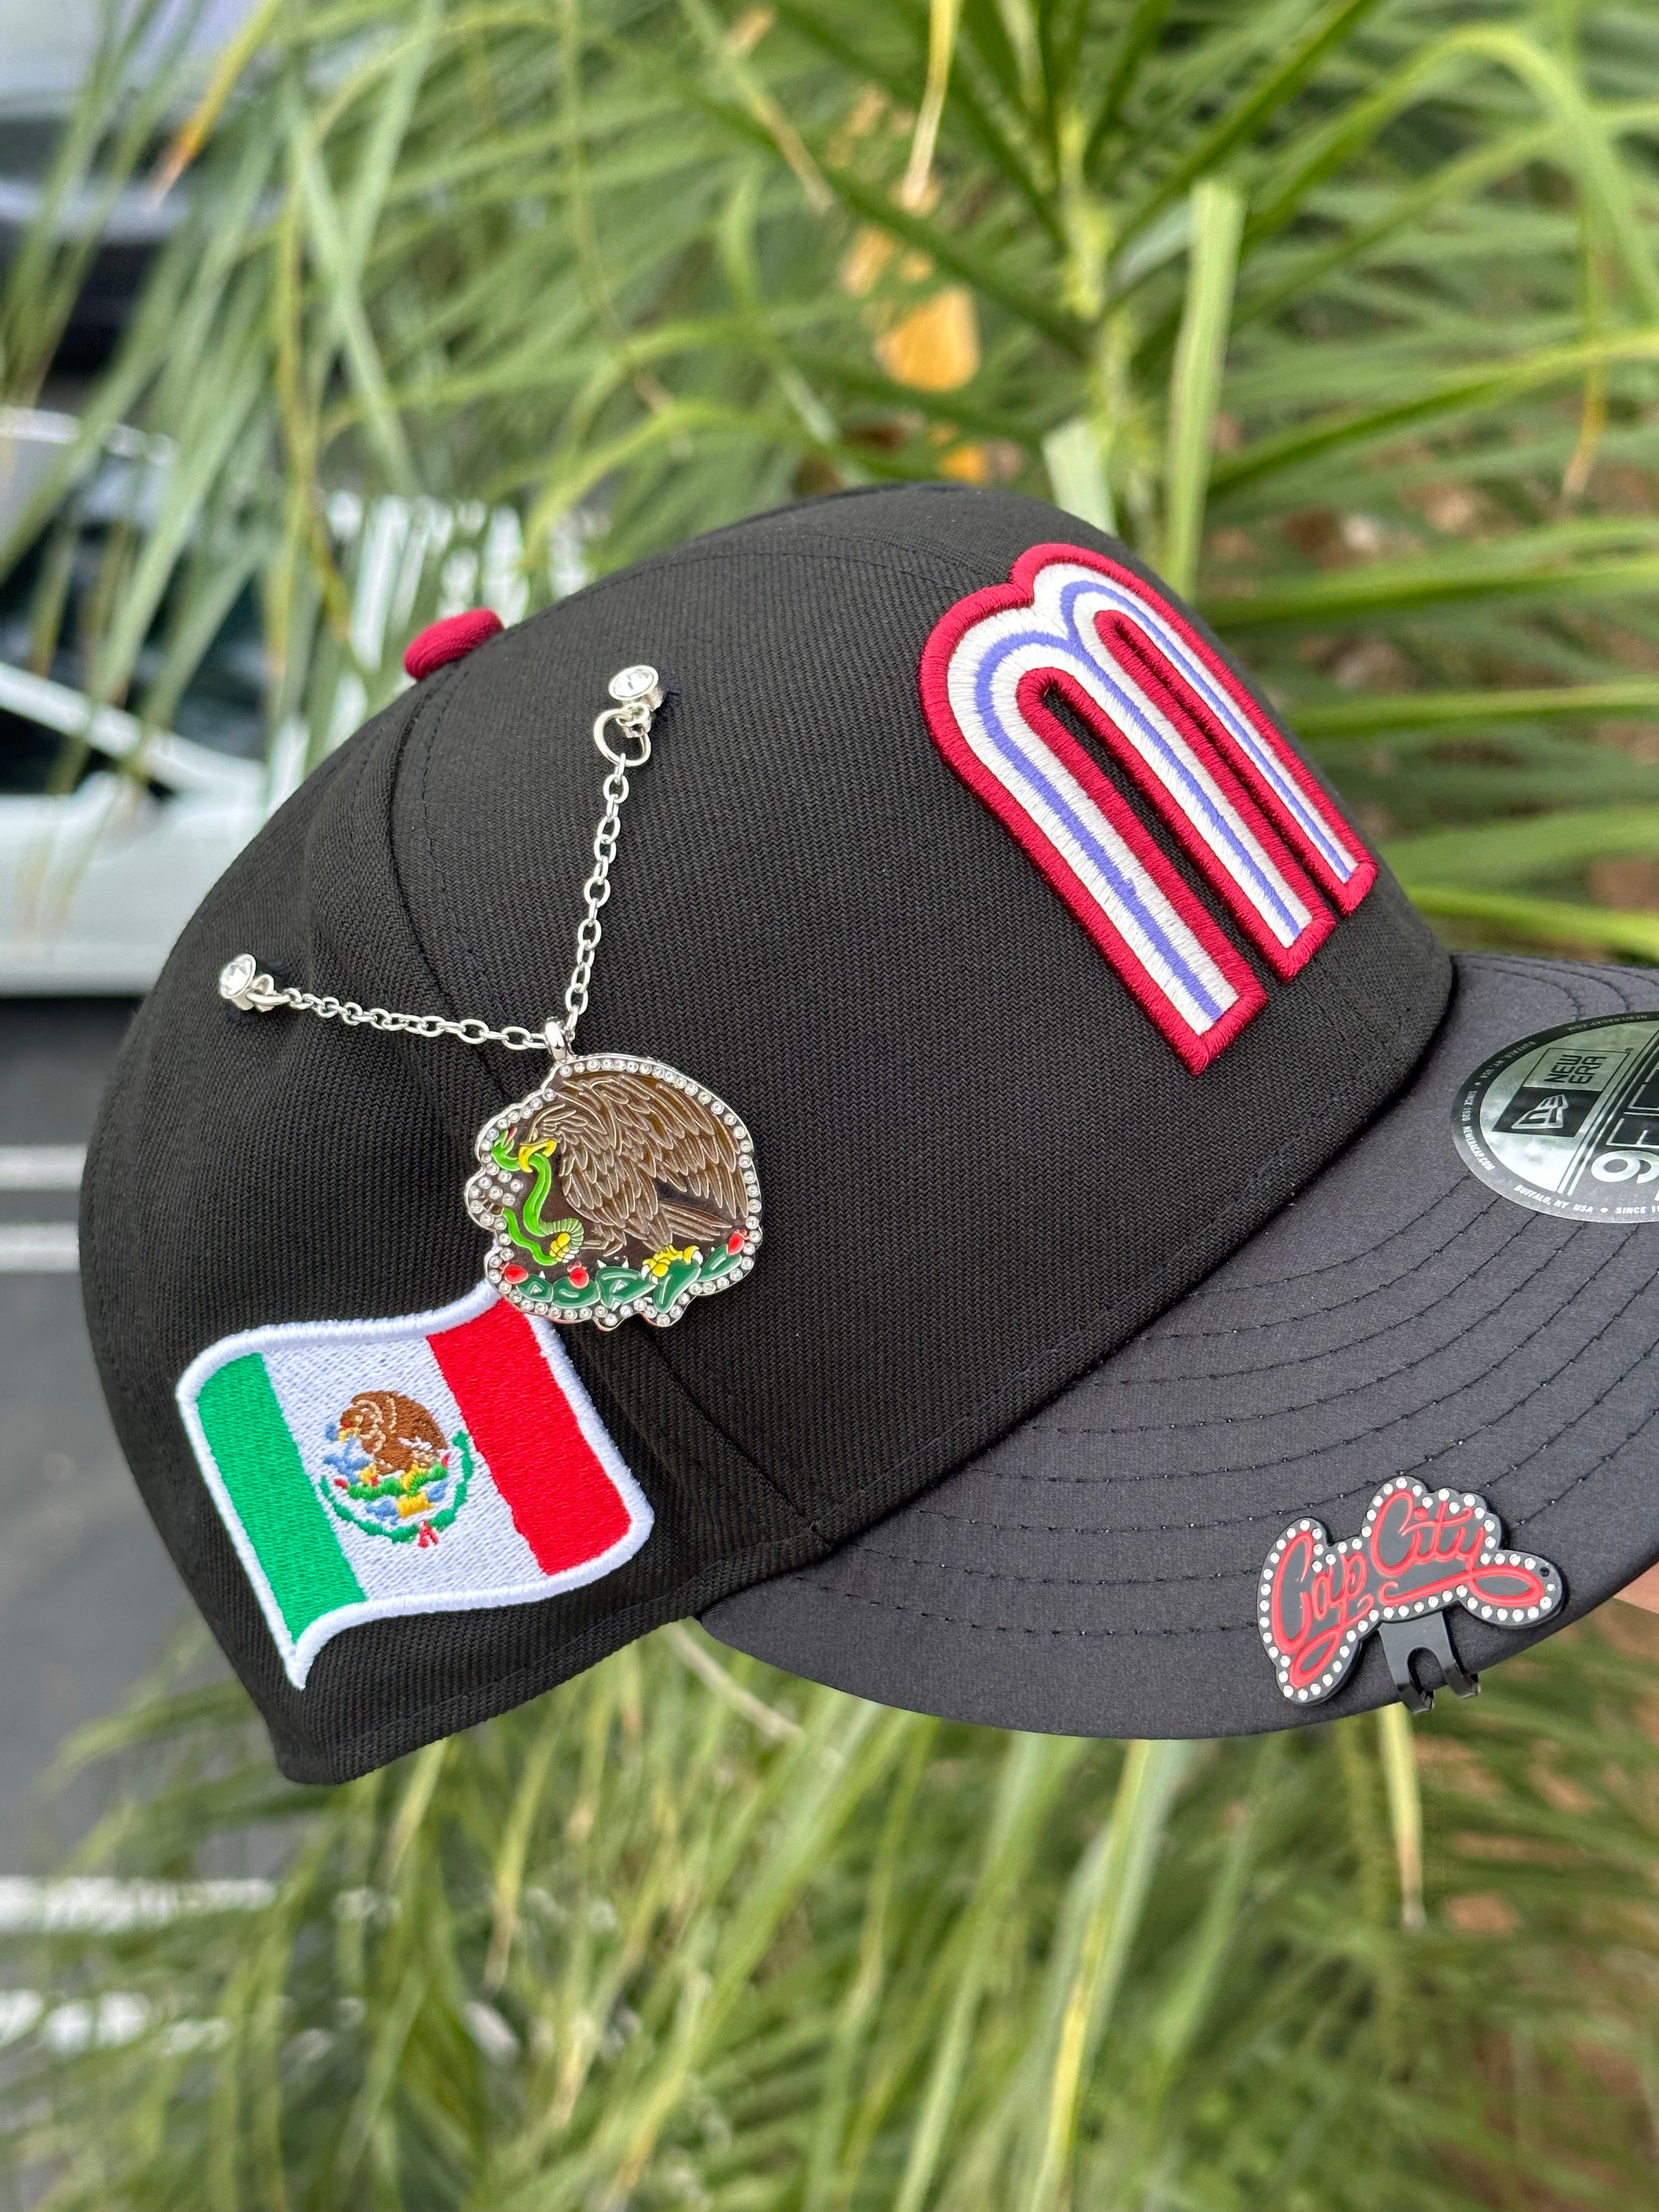 NEW ERA EXCLUSIVE 9FIFTY BLACK/SATIN MEXICO TWO TONE SNAPBACK W/ MEXICO FLAG SIDE PATCH